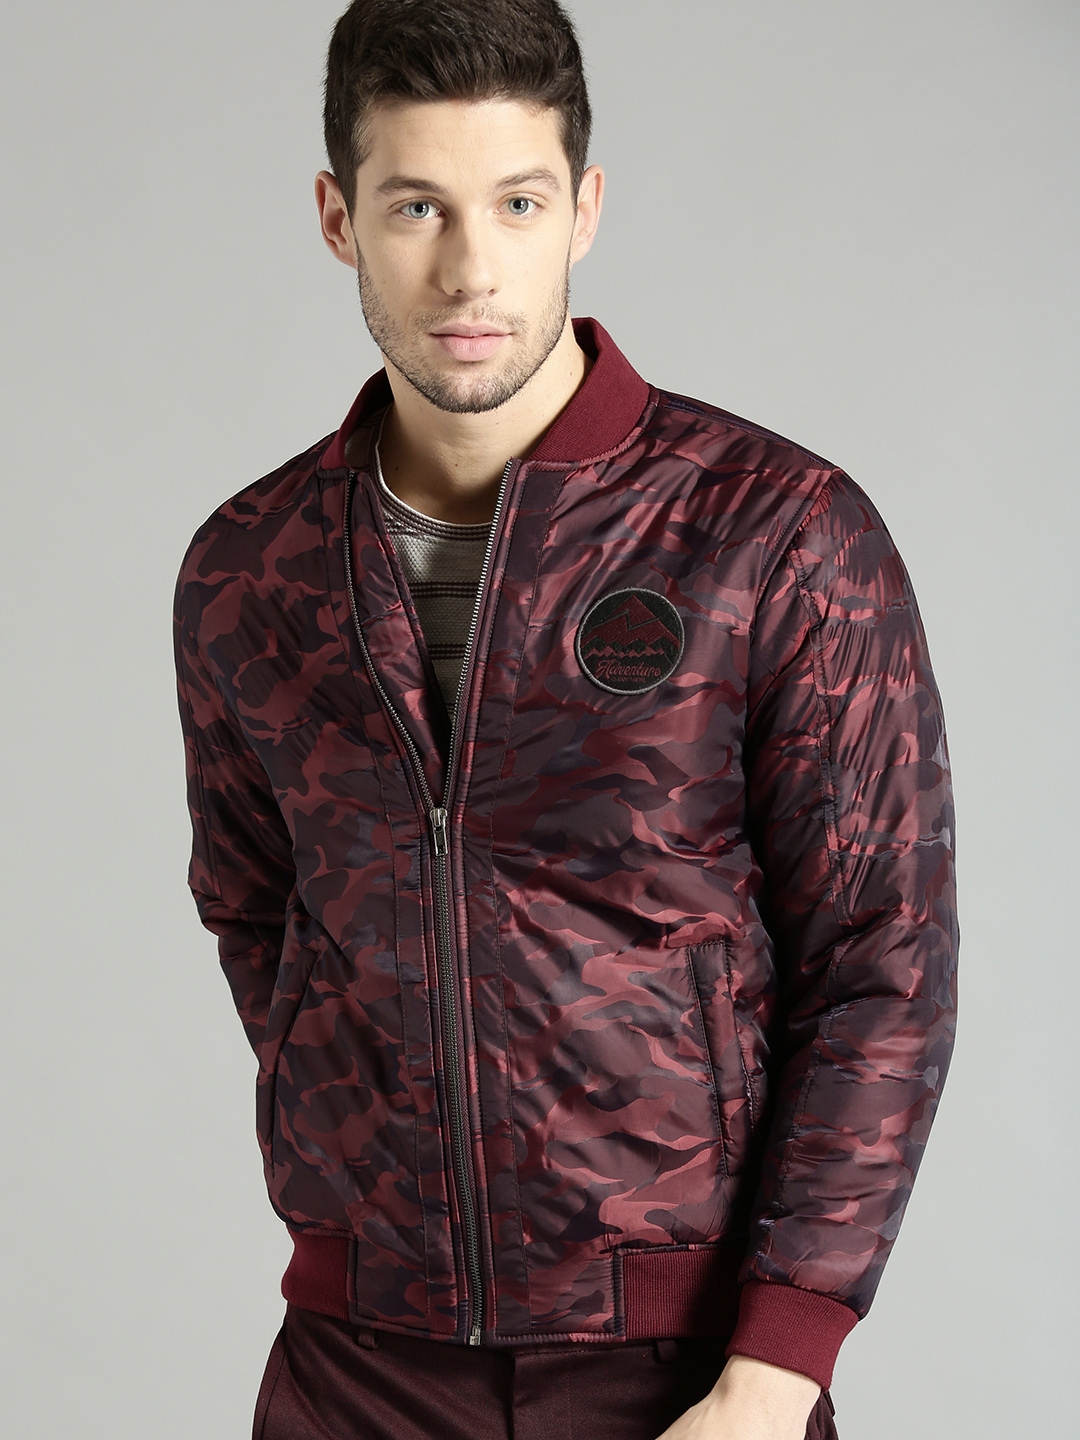 Buy The Roadster Lifestyle Co Men Maroon Camouflage Print Bomber Jacket ...